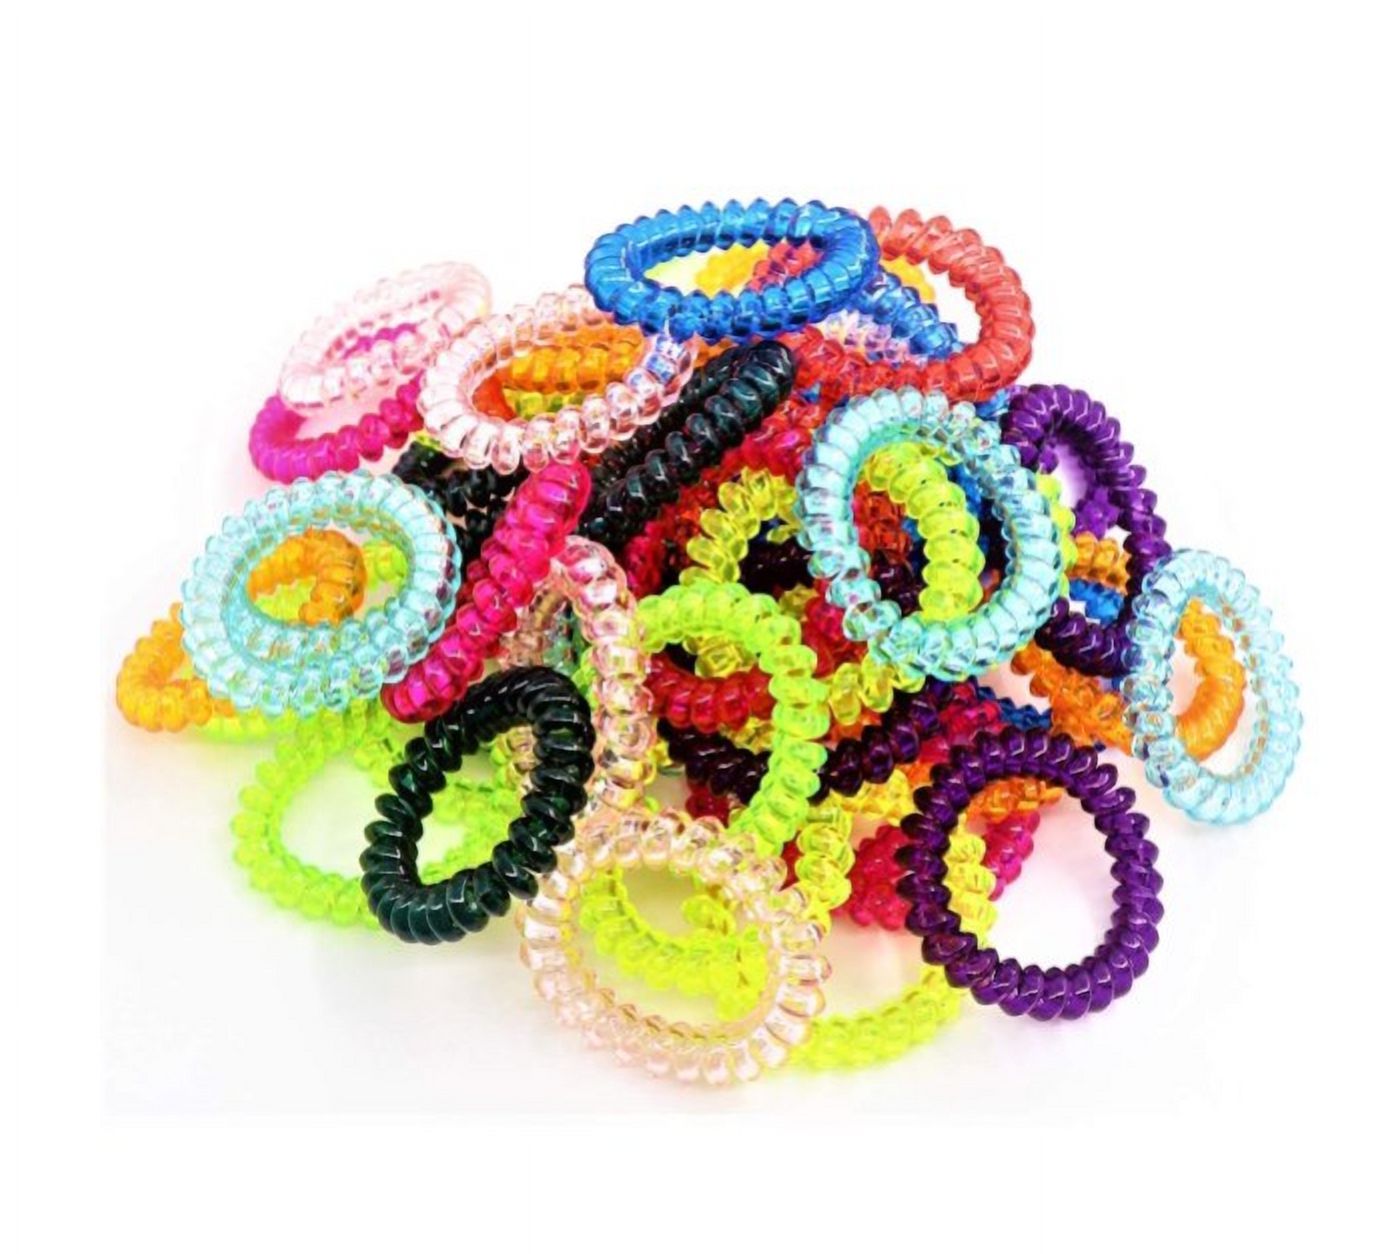 Spiral Hair Ties,50 Pcs Colorful No Crease Hair Ties,Candy Color Phone Cord Hair Ties Coils,Spiral Bracelets,Elastic Coil Hair Ties Ponytail Holders Hair Accessories for Women Girls All Hair Styles - image 2 of 10